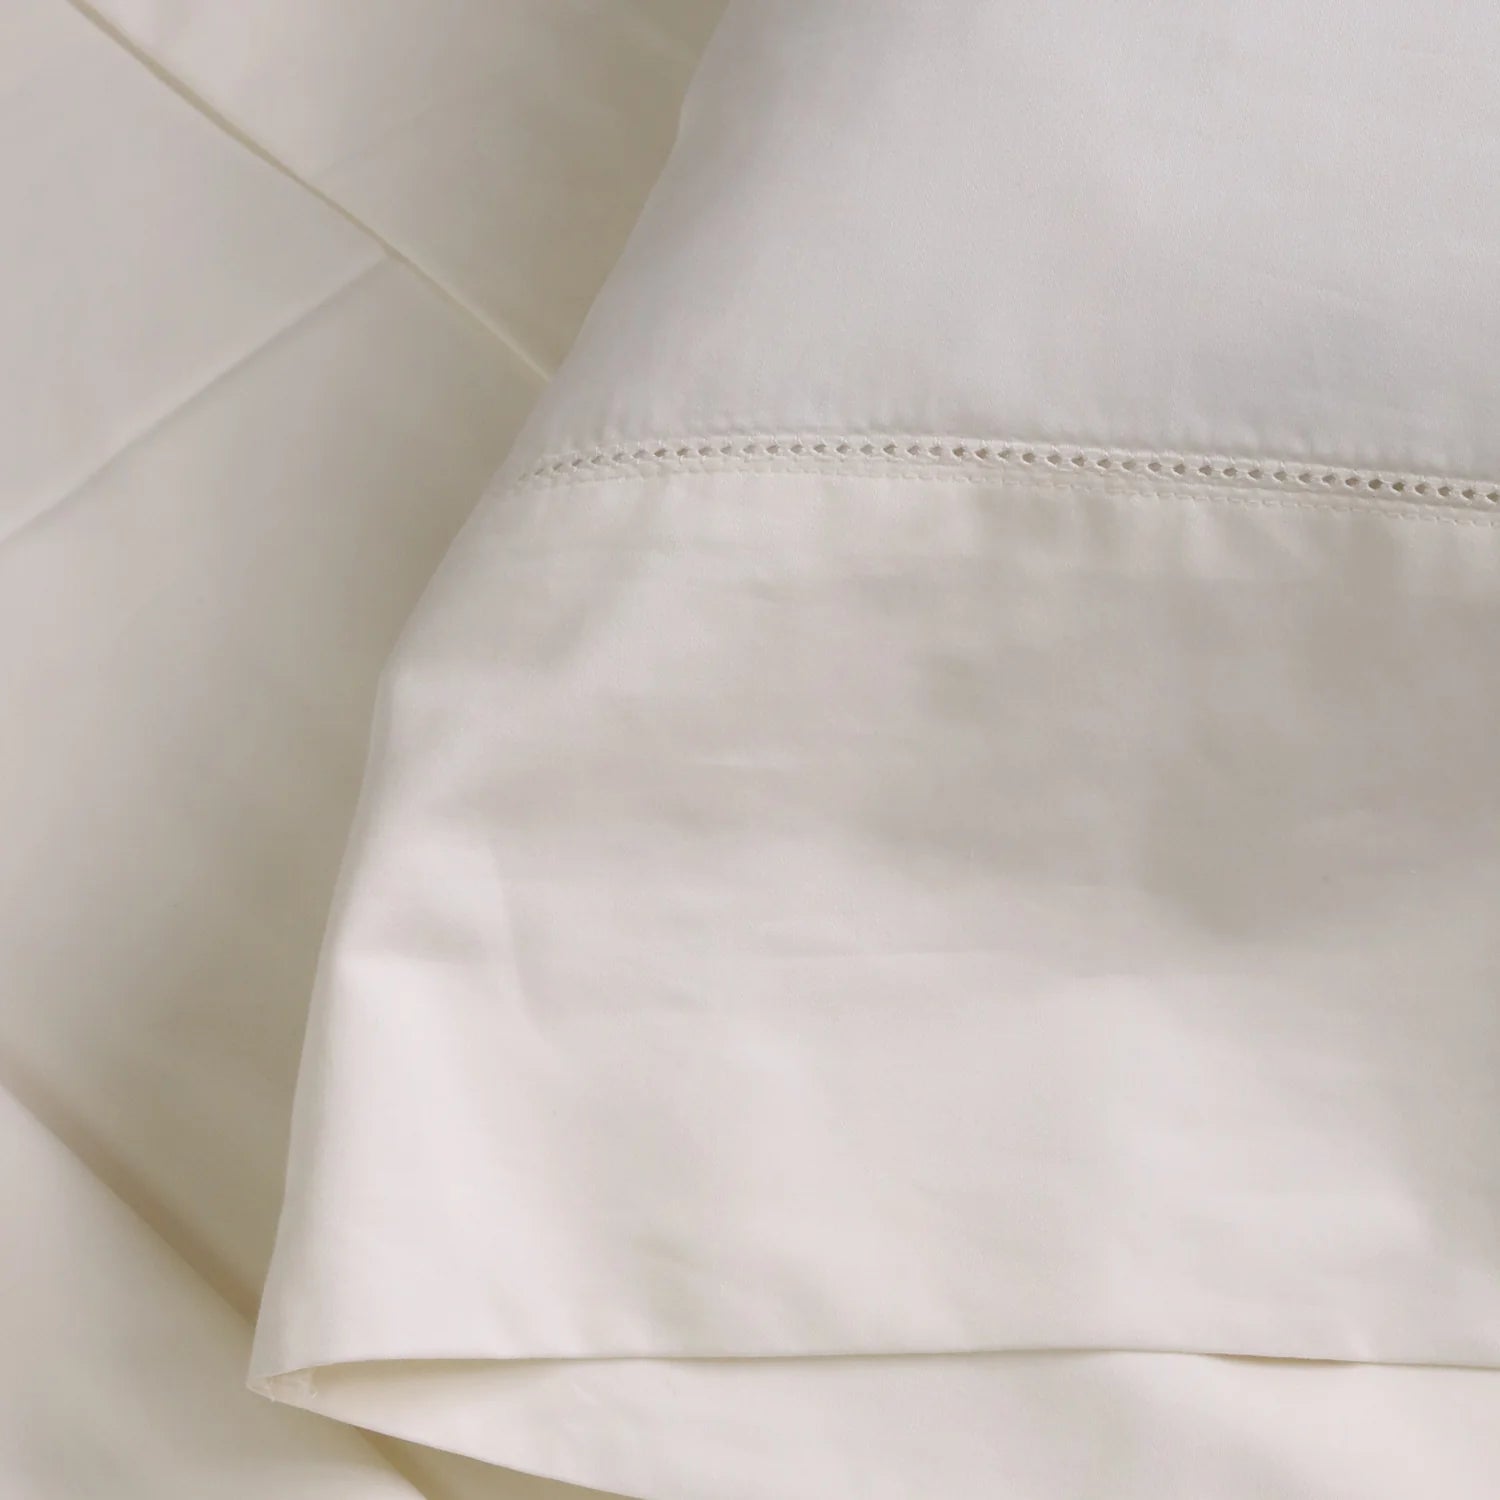 Classico Hemstitch Cotton Sateen Sheet Set by Pom Pom at Home